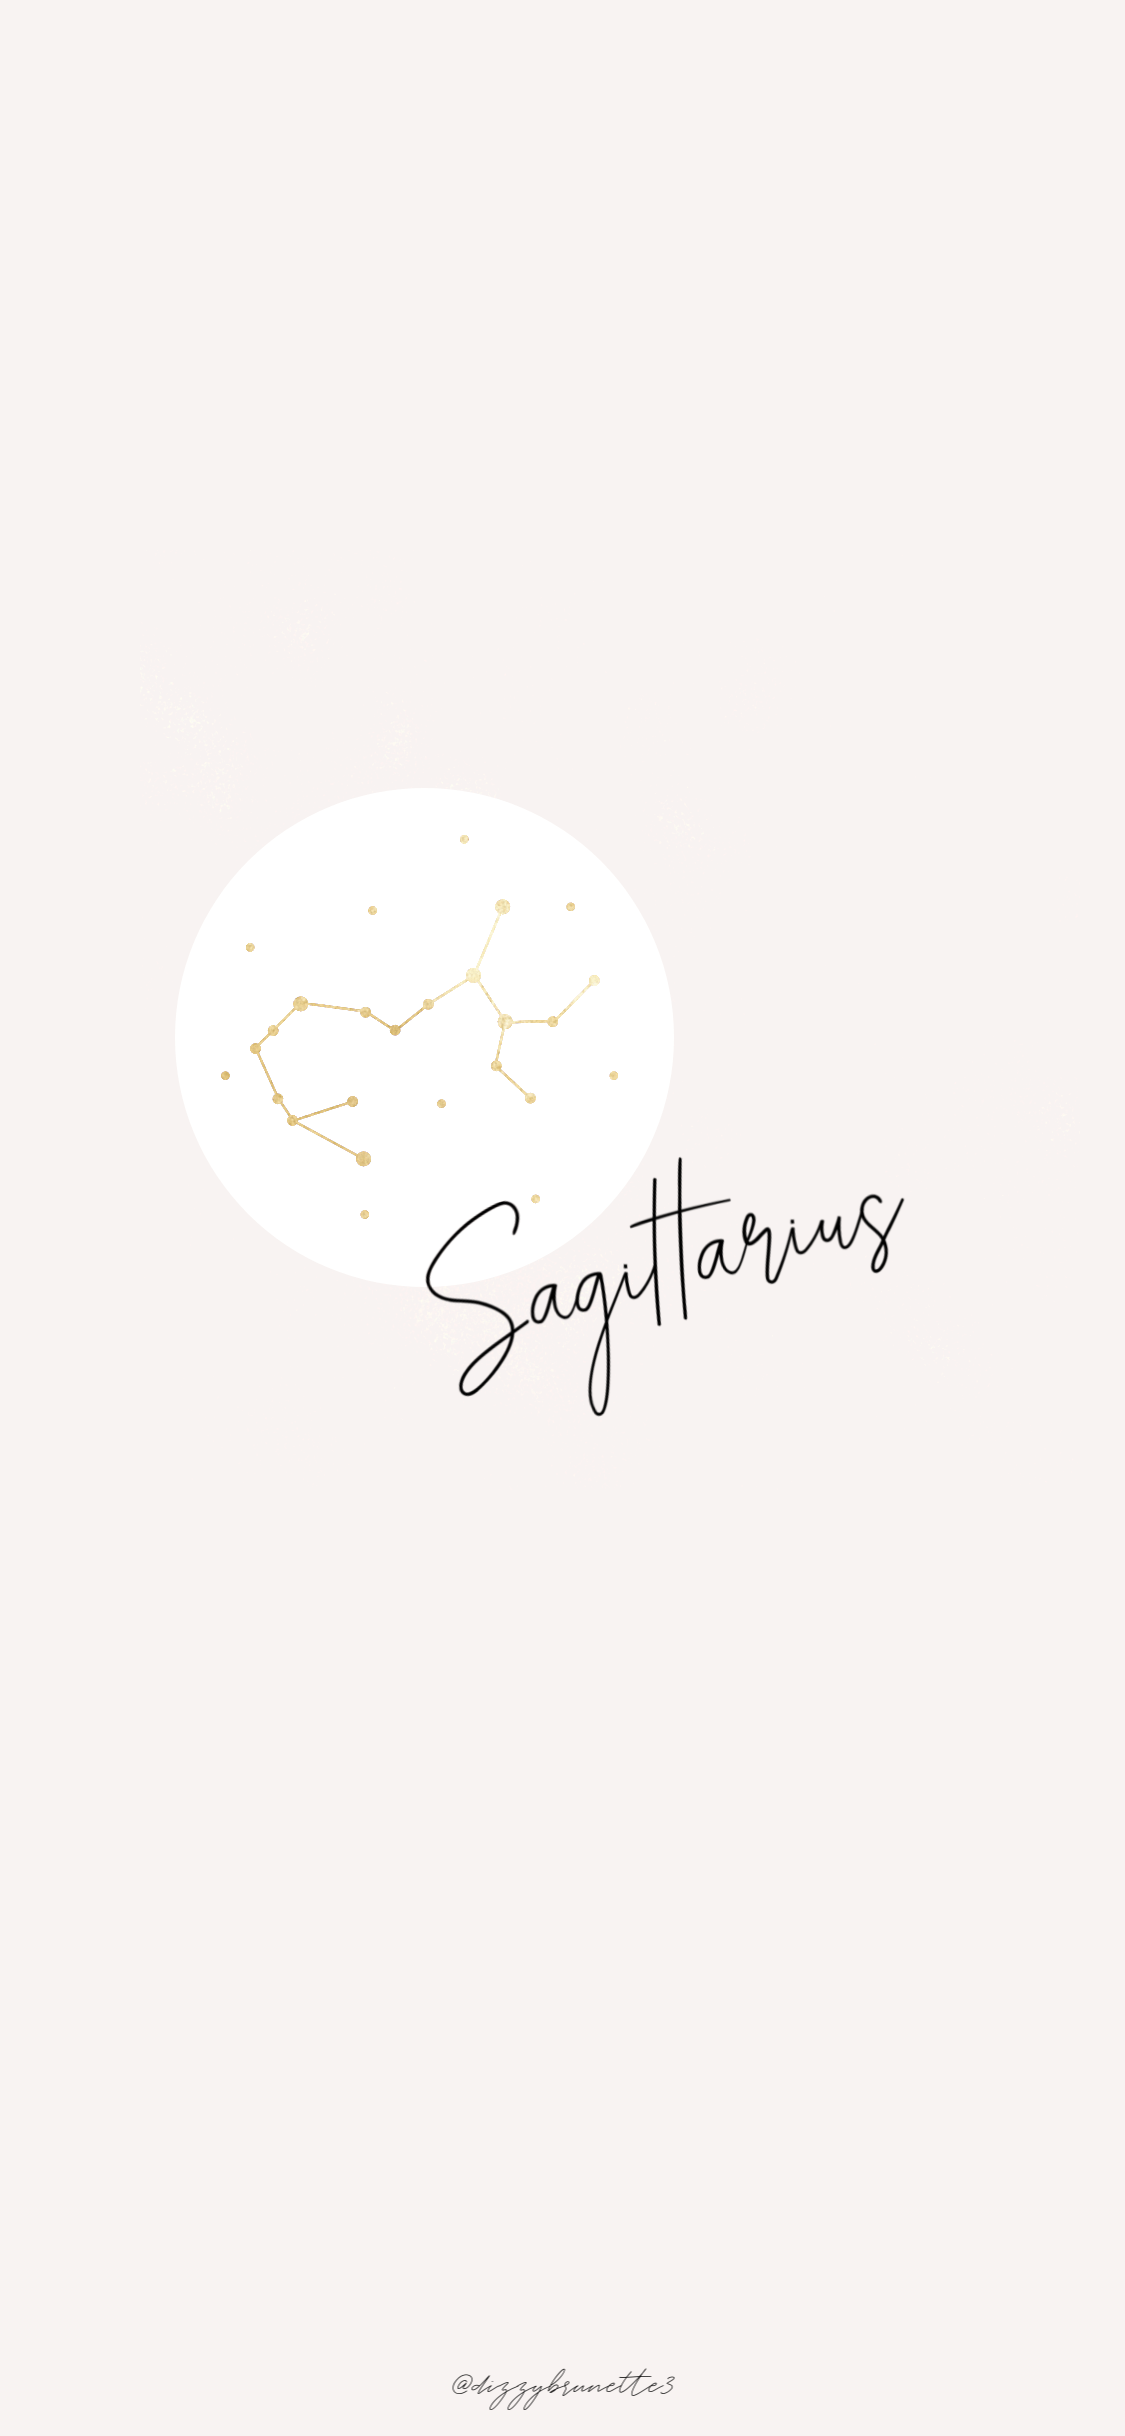 Free Phone Wallpaper : April #phoneaccessories. Sagittarius wallpaper, Free phone wallpaper, Phone wallpaper quotes